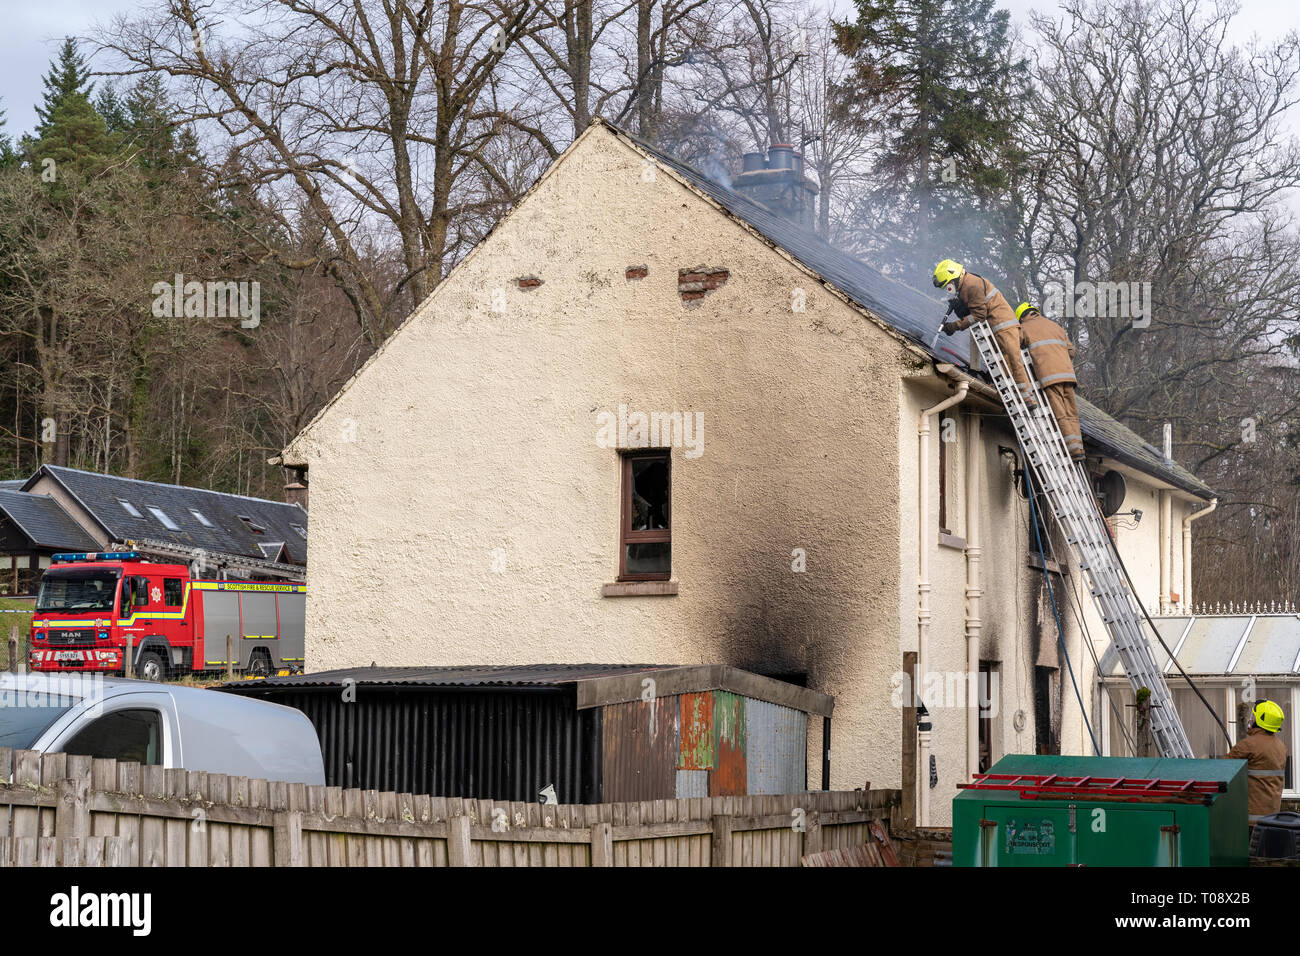 This is the scene of the Fire within the house at 3 Garry Crescent, Invergarry, Highlands, Scotland on 18 March 2019. Nobody was injured. Stock Photo